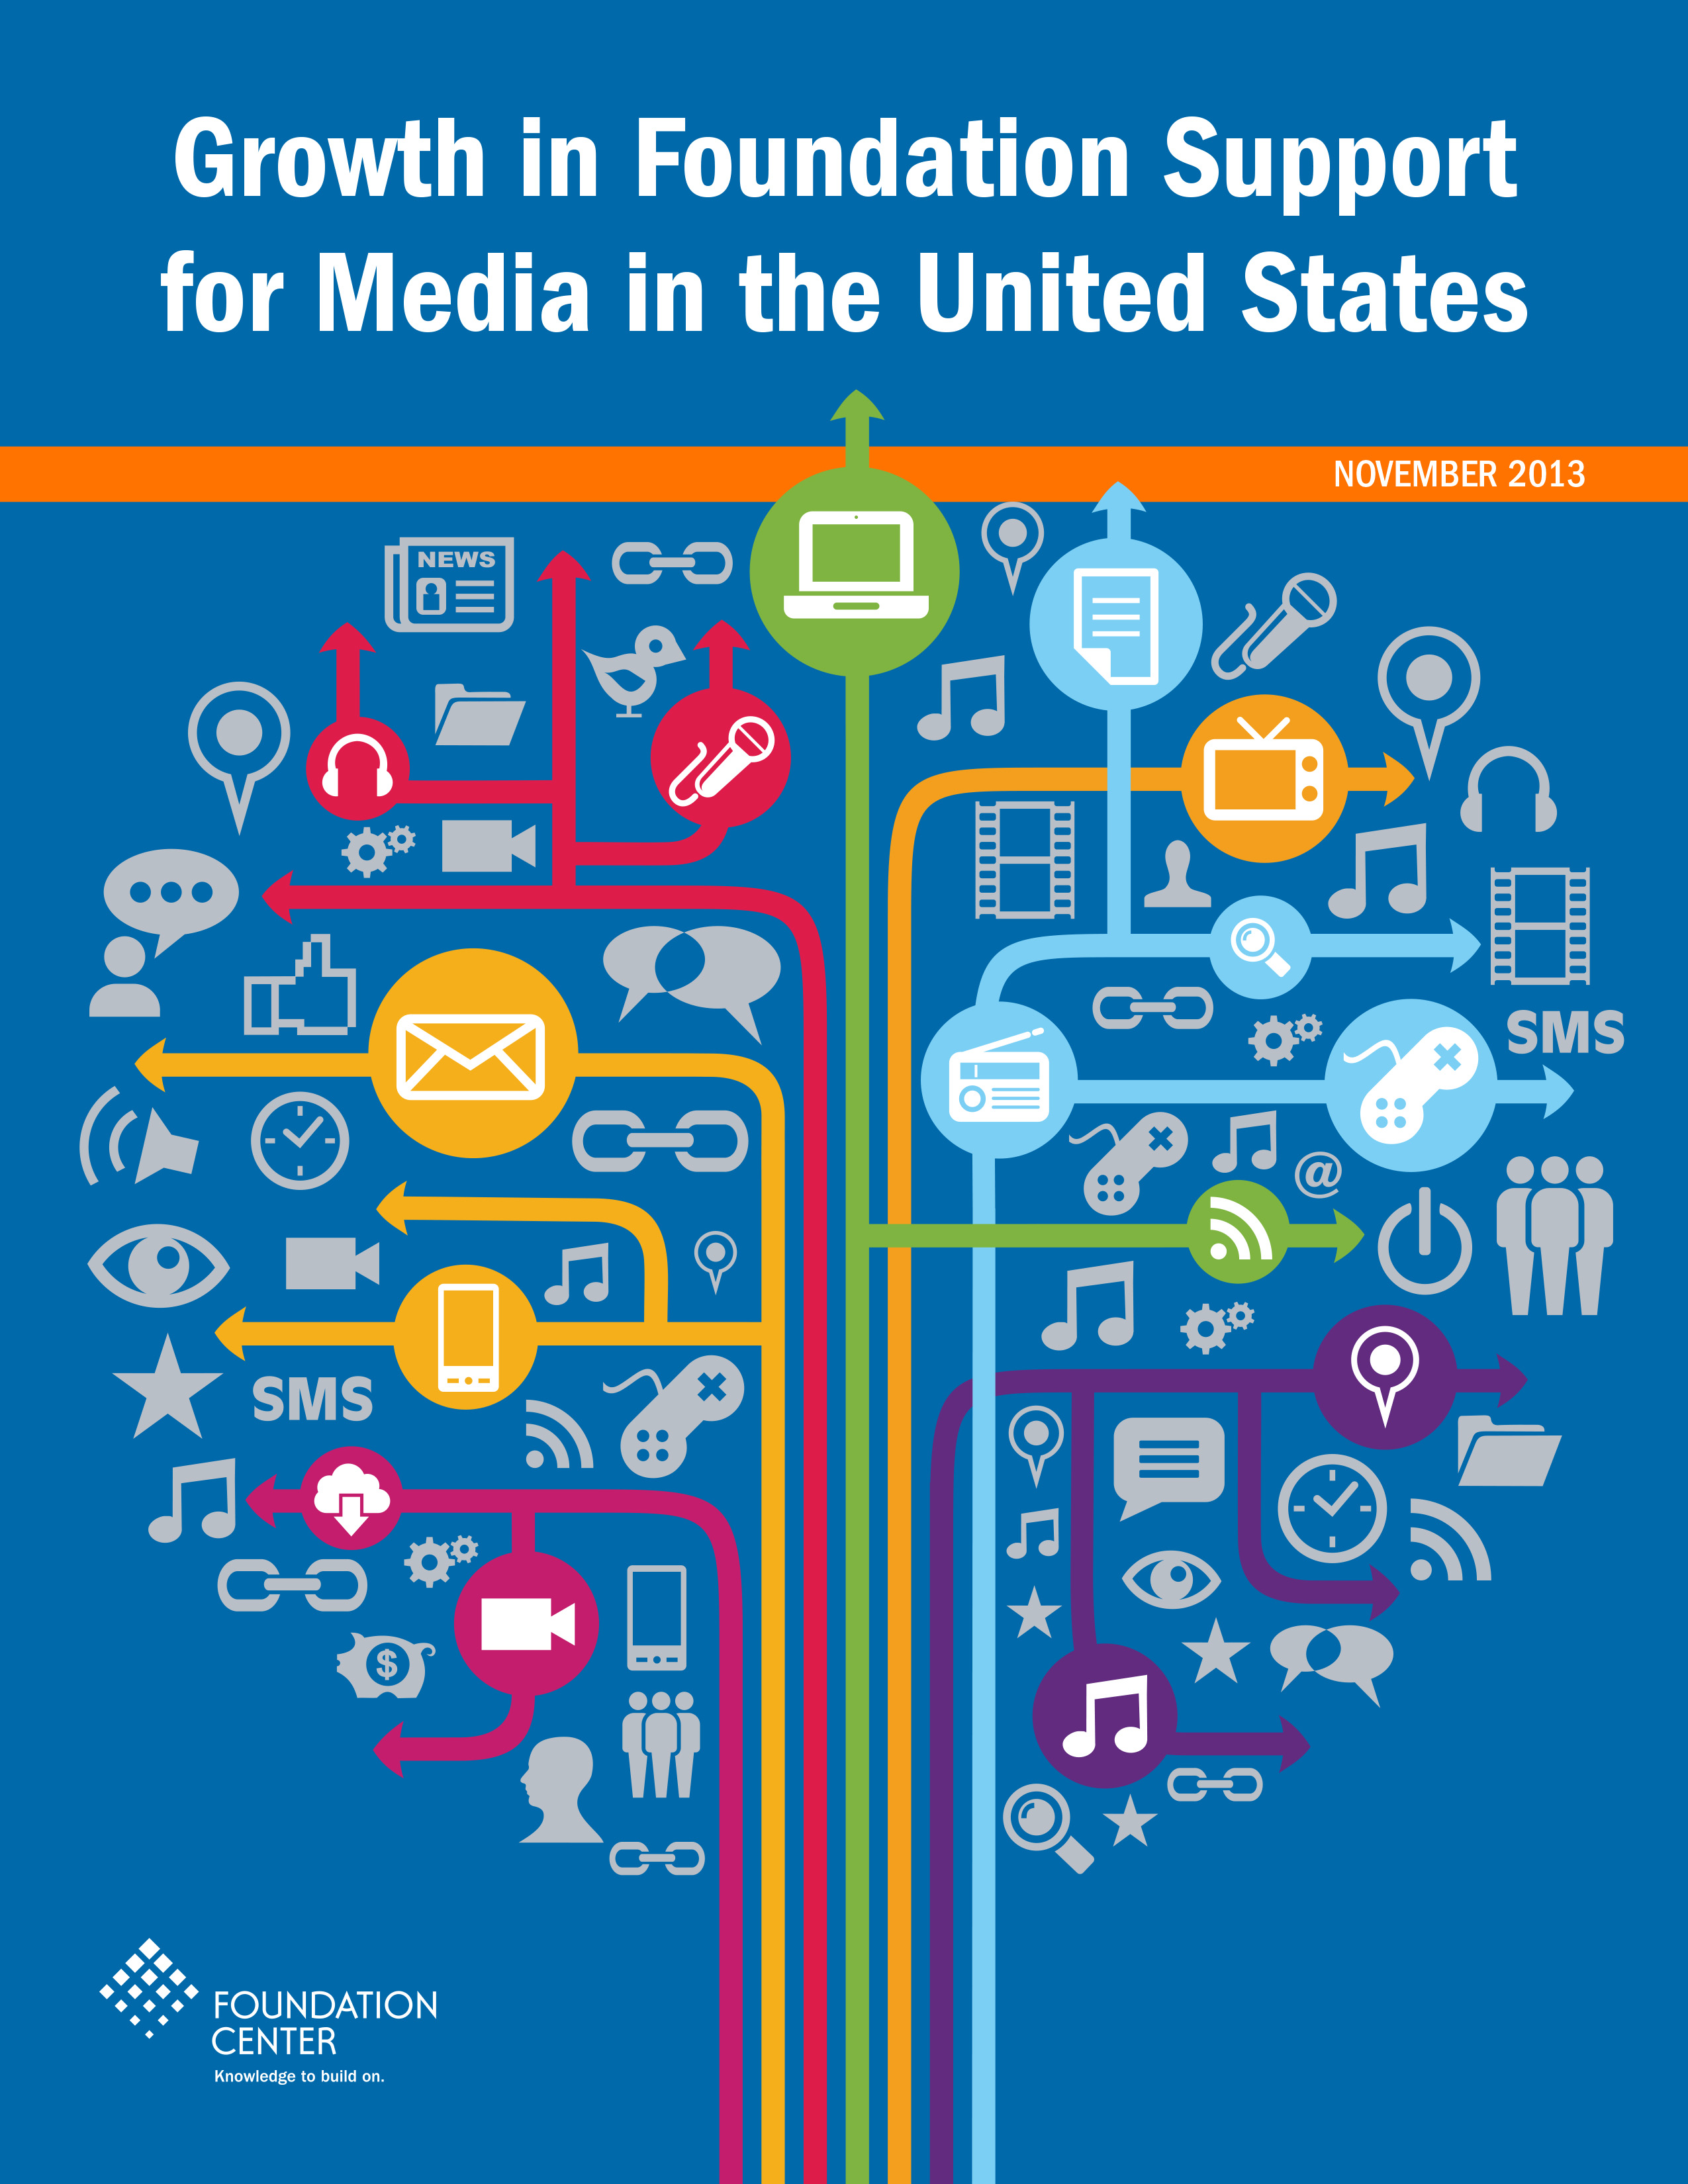 Philanthropy’s Role in the Media Landscape